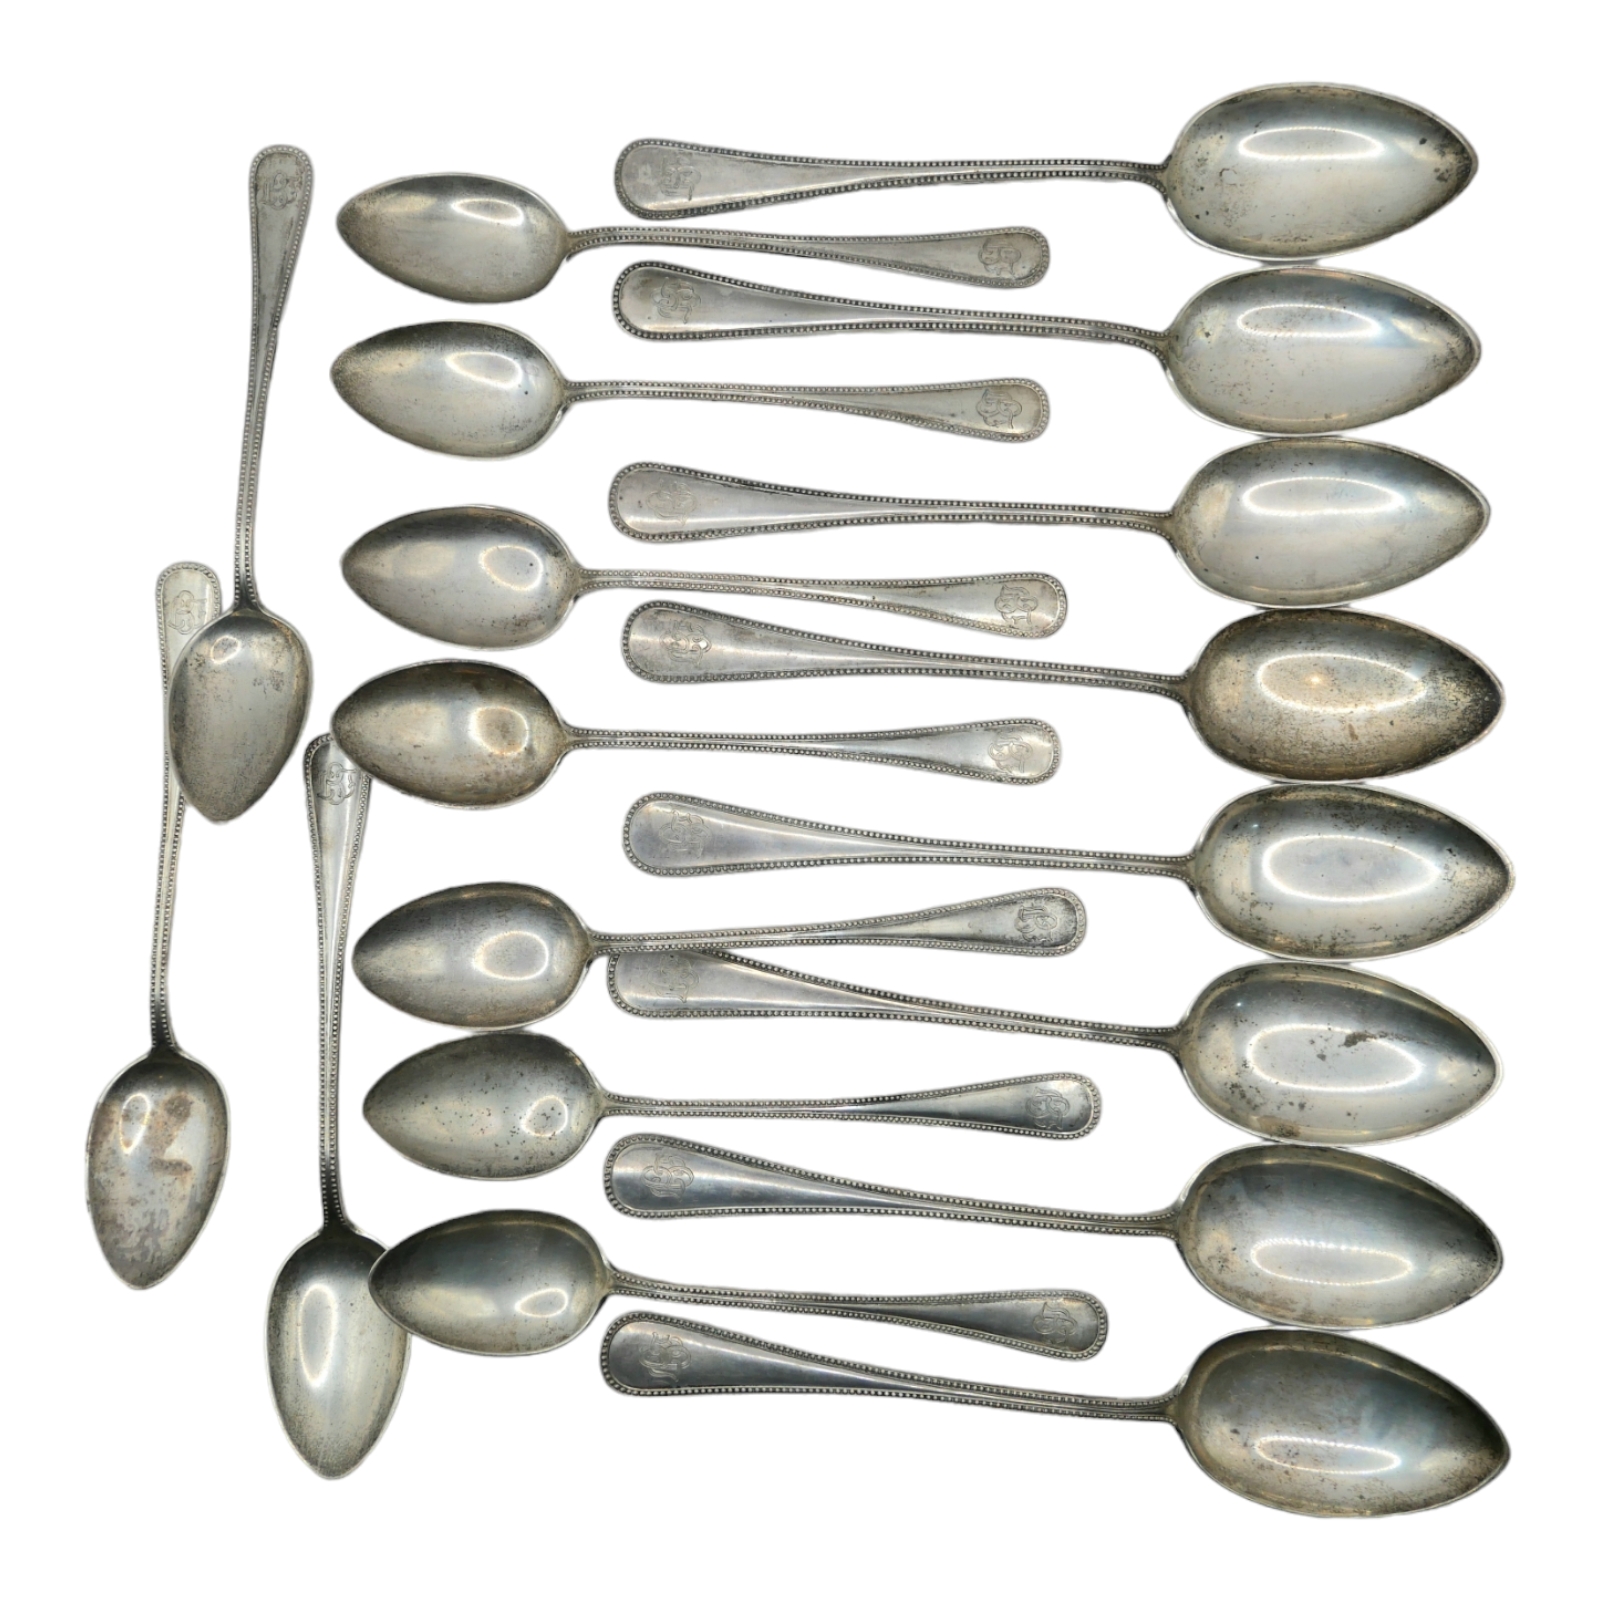 J. TOSTRIP, OSLO, EARLY 20TH CENTURY DANISH SILVER FLATWARE, CIRCA 1918 J. Tostrup, Oslo. Early 20th - Image 7 of 7